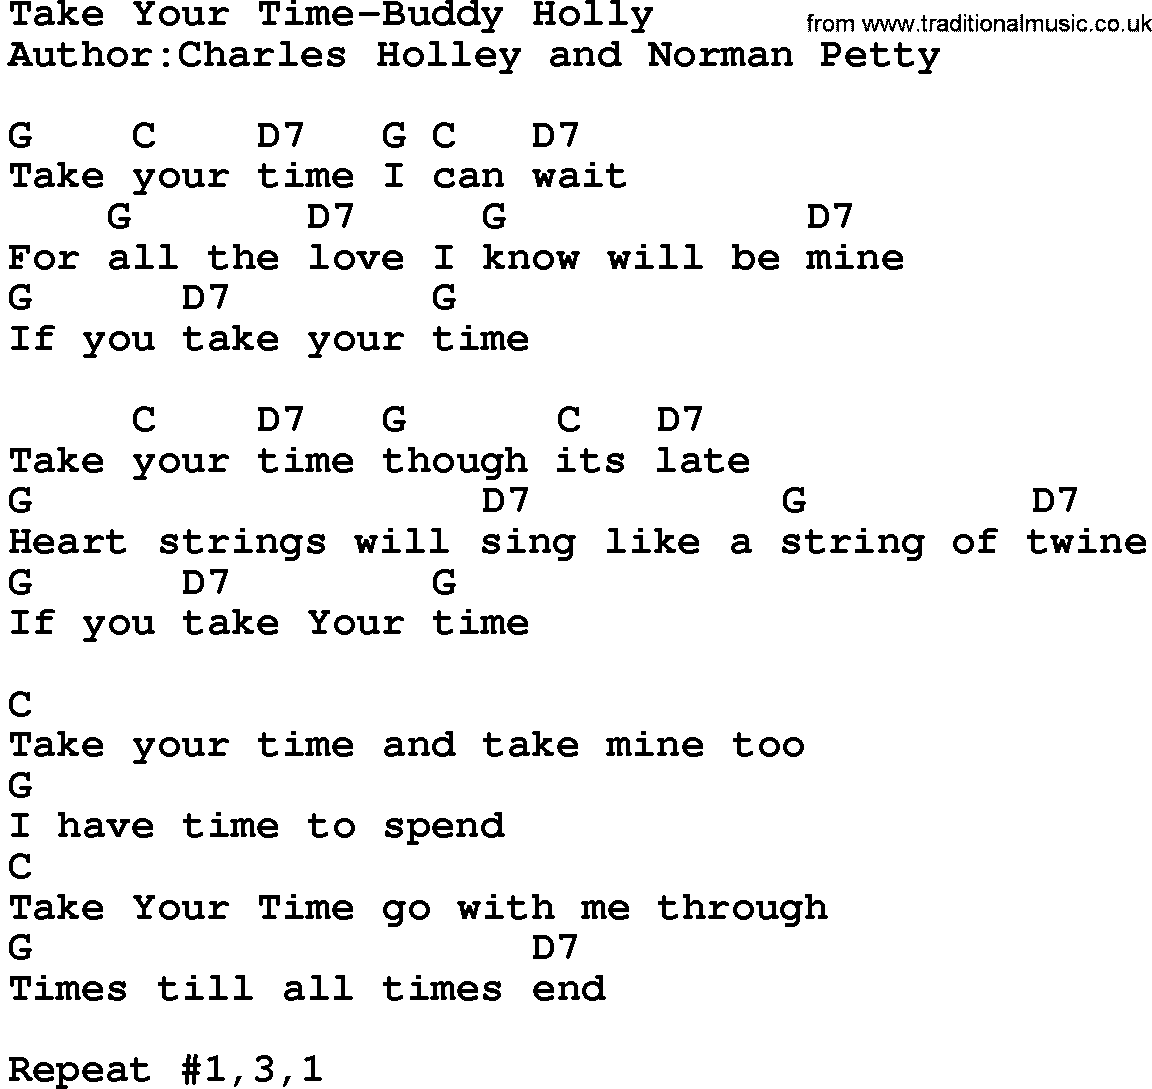 Country music song: Take Your Time-Buddy Holly lyrics and chords